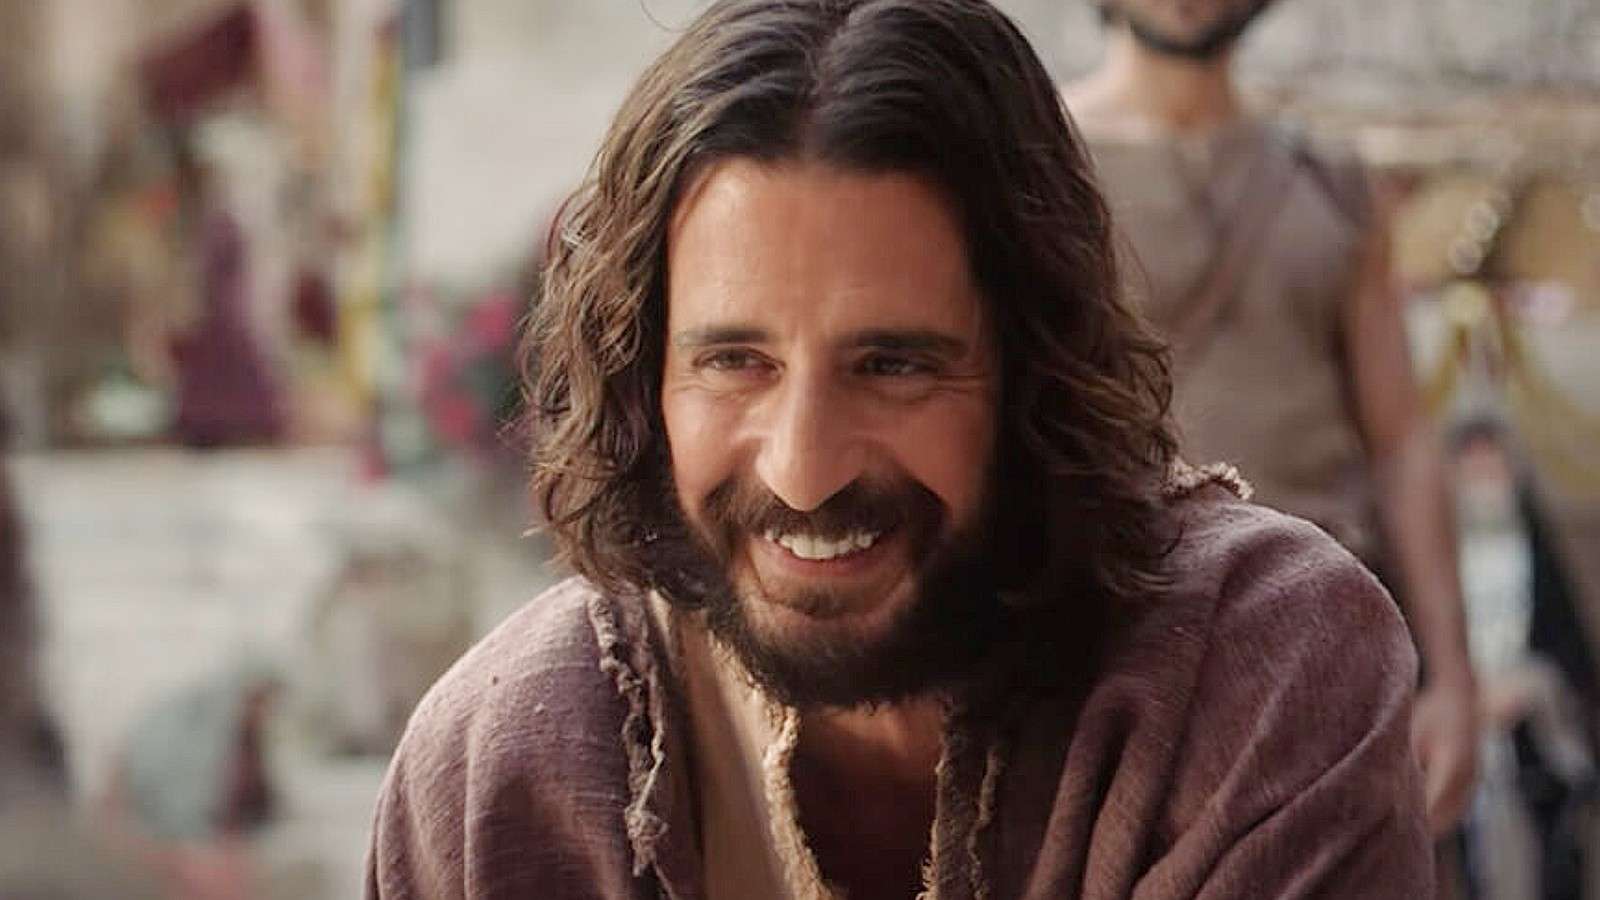 Jonathan Roumie as Jesus in The Chosen S4